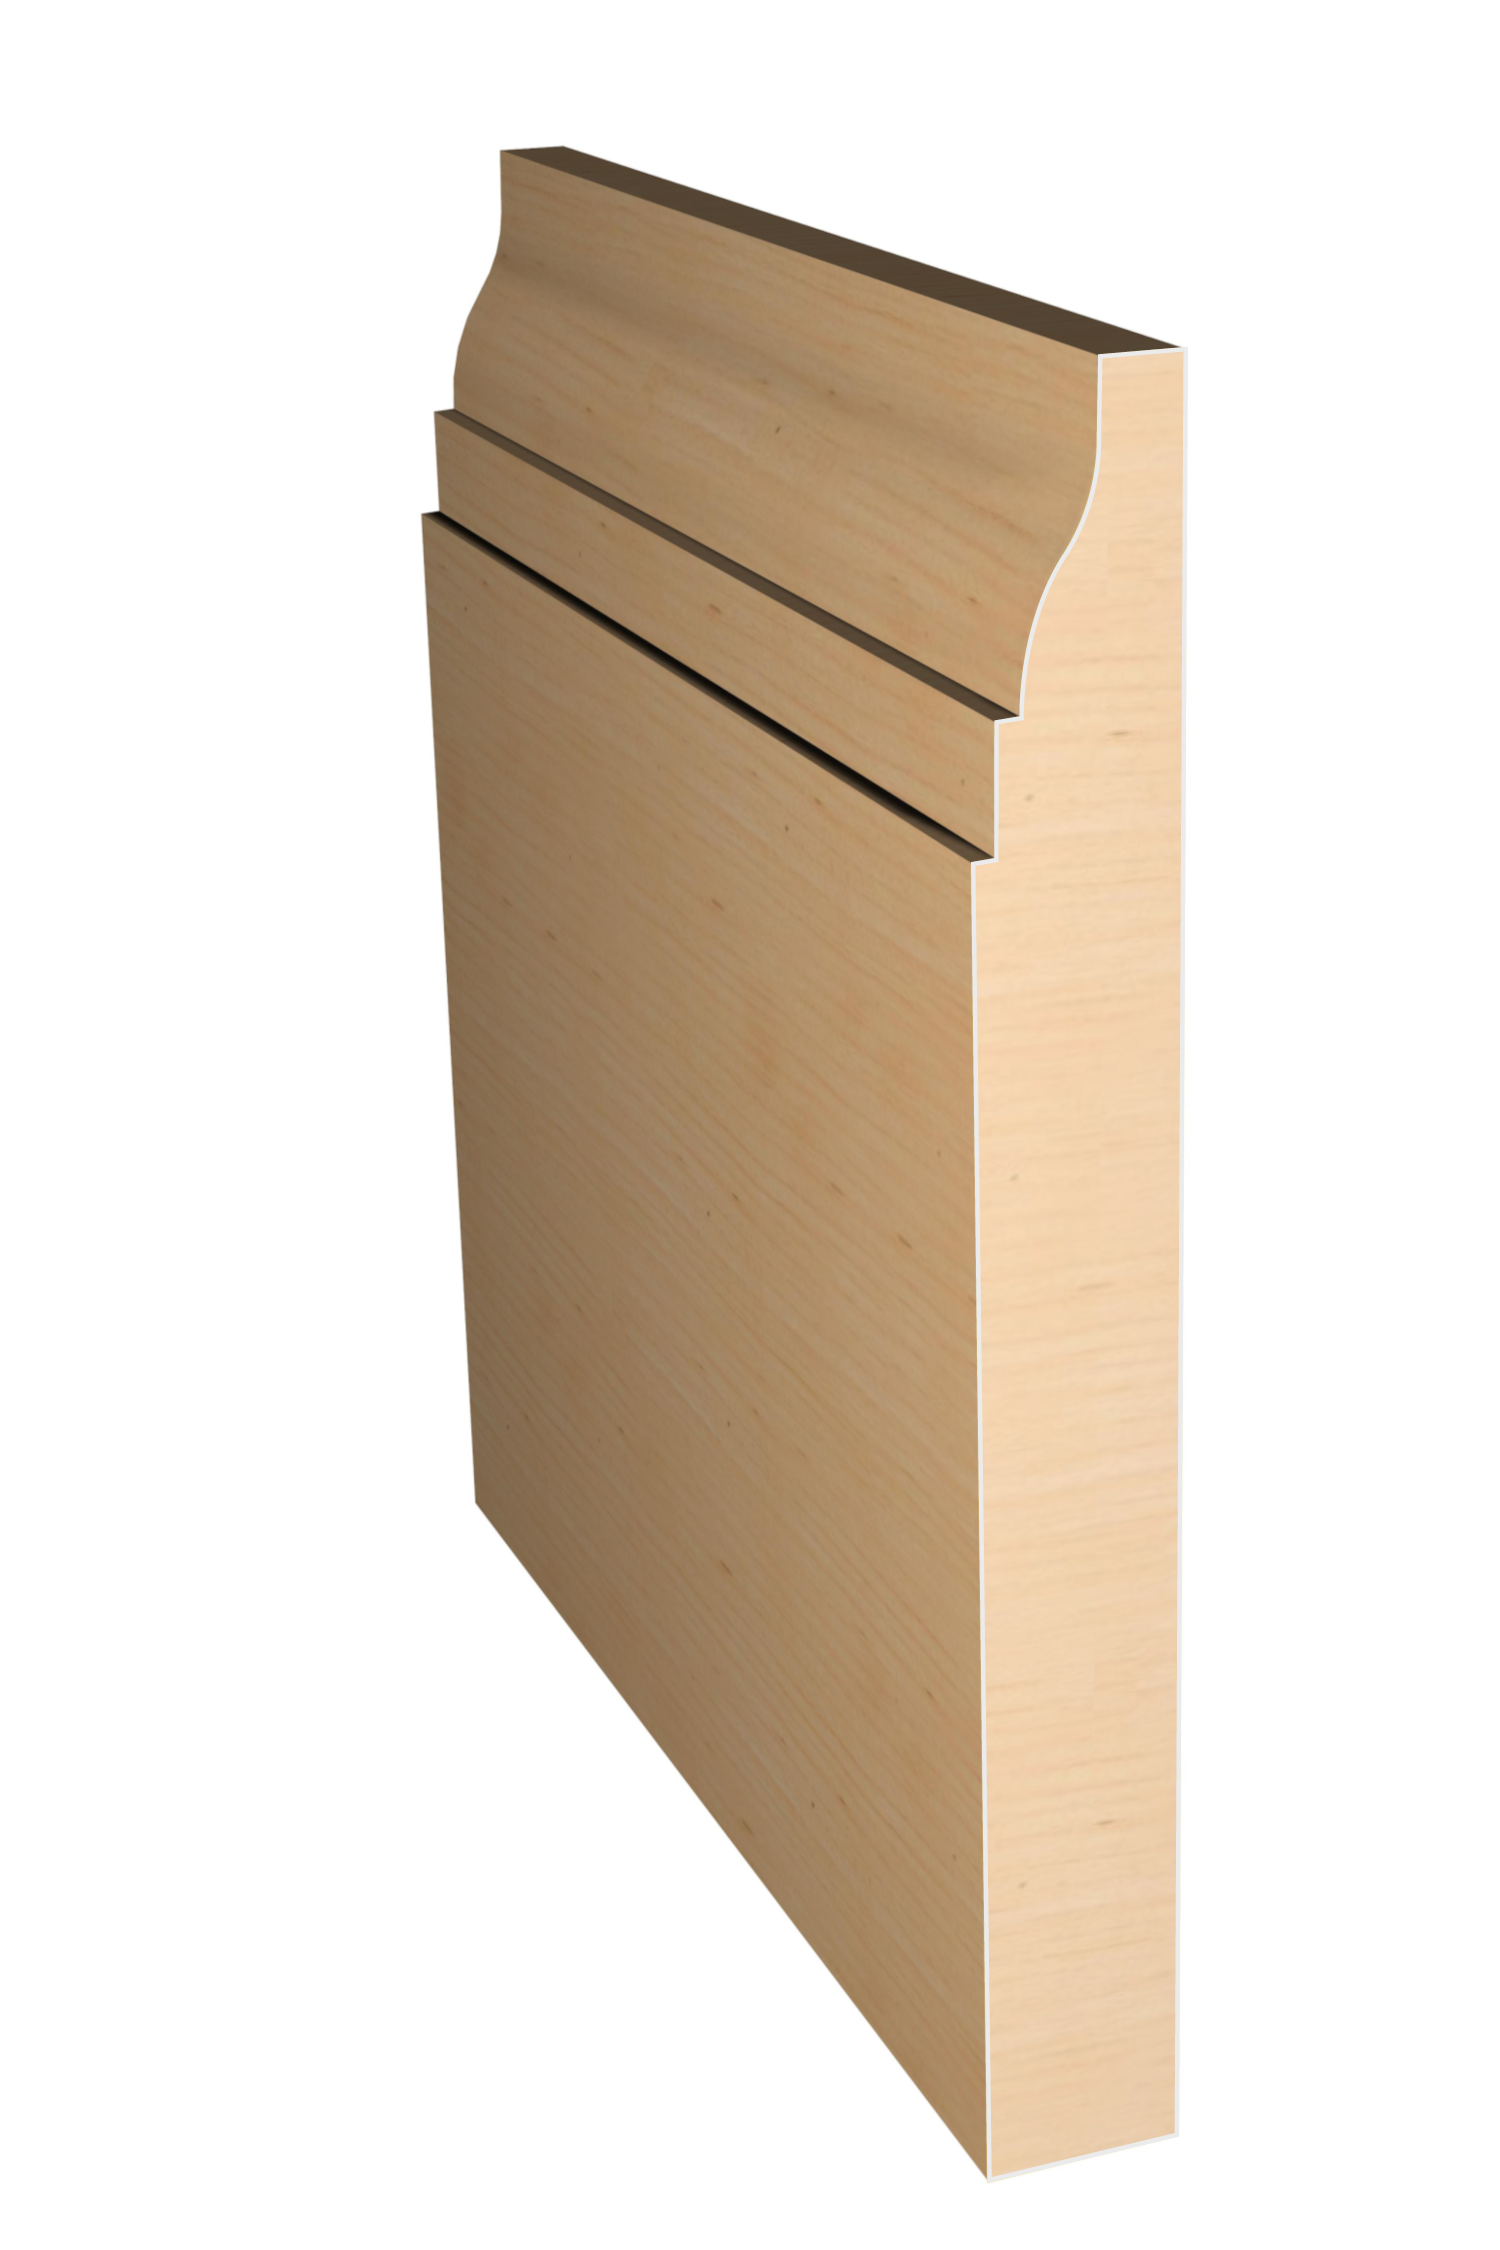 Three dimensional rendering of custom base wood molding BAPL6124 made by Public Lumber Company in Detroit.